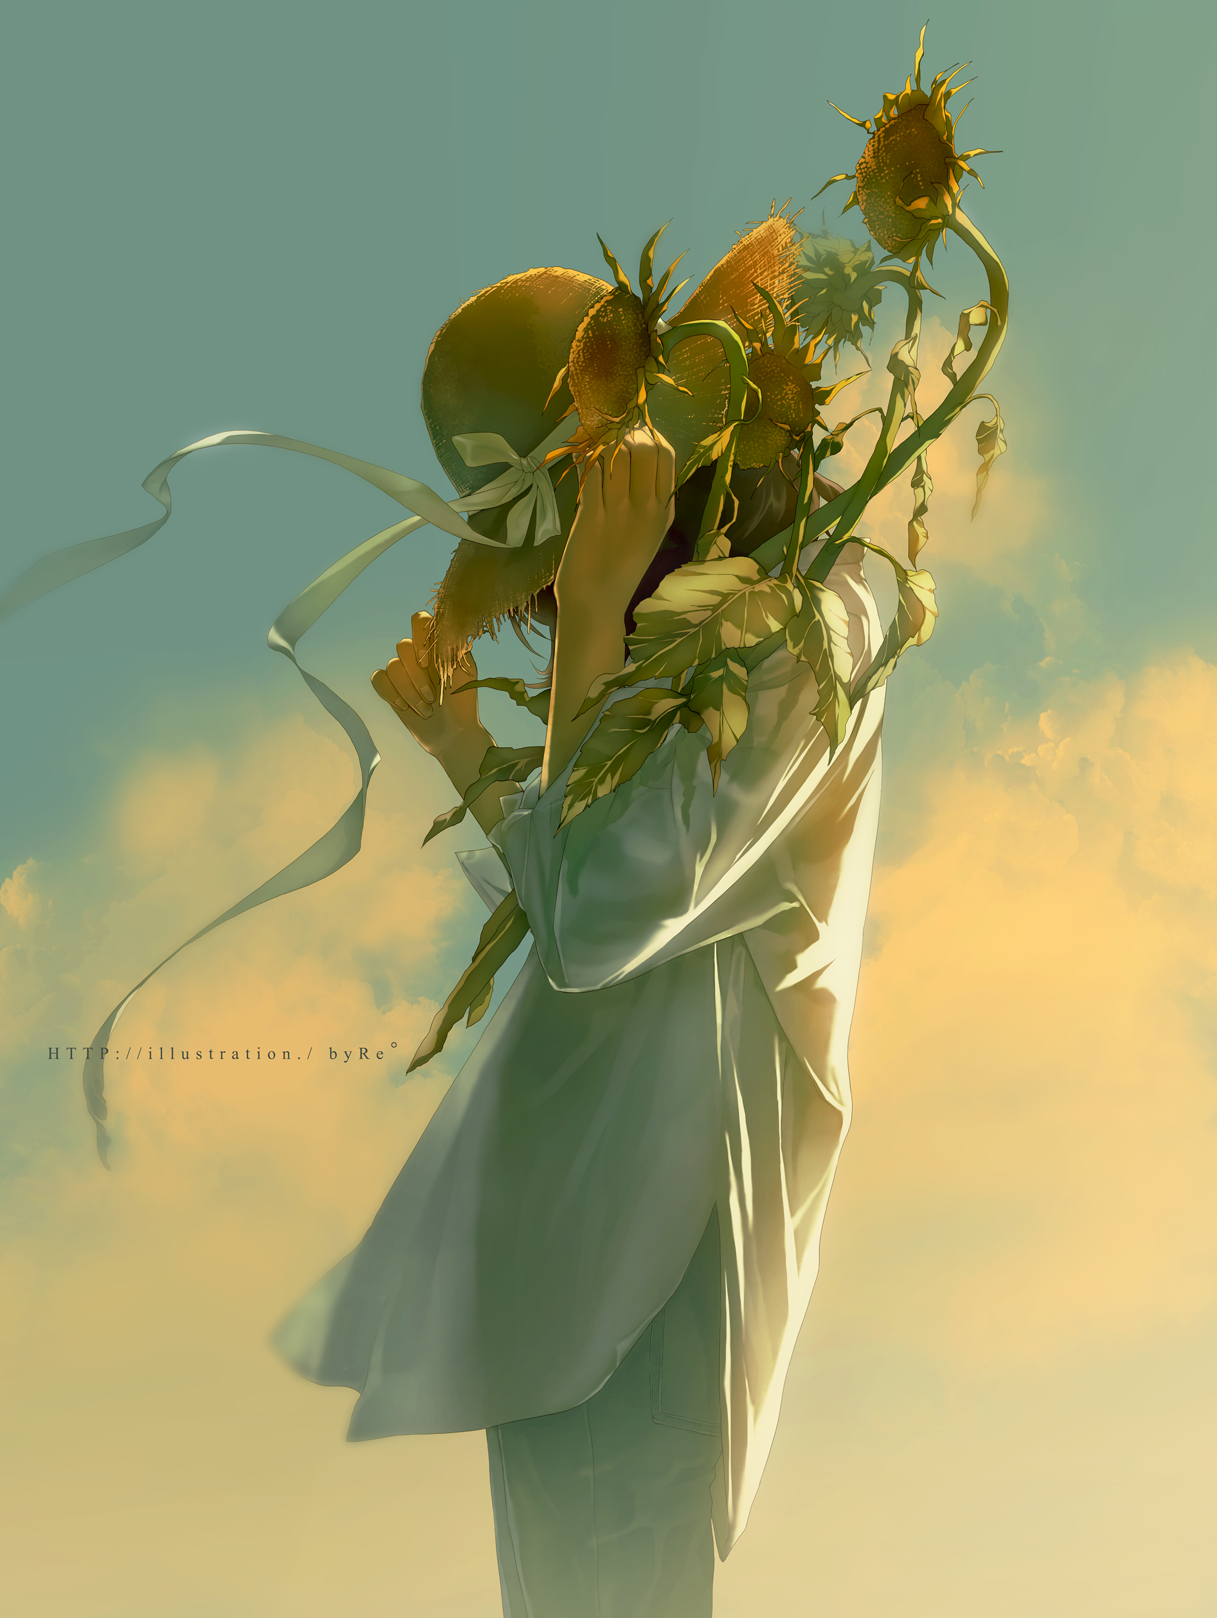 Anime 1217x1618 anime anime girls Pixiv Summer's end portrait display standing straw hat minimalism watermarked clouds simple background leaves sunflowers head tilt